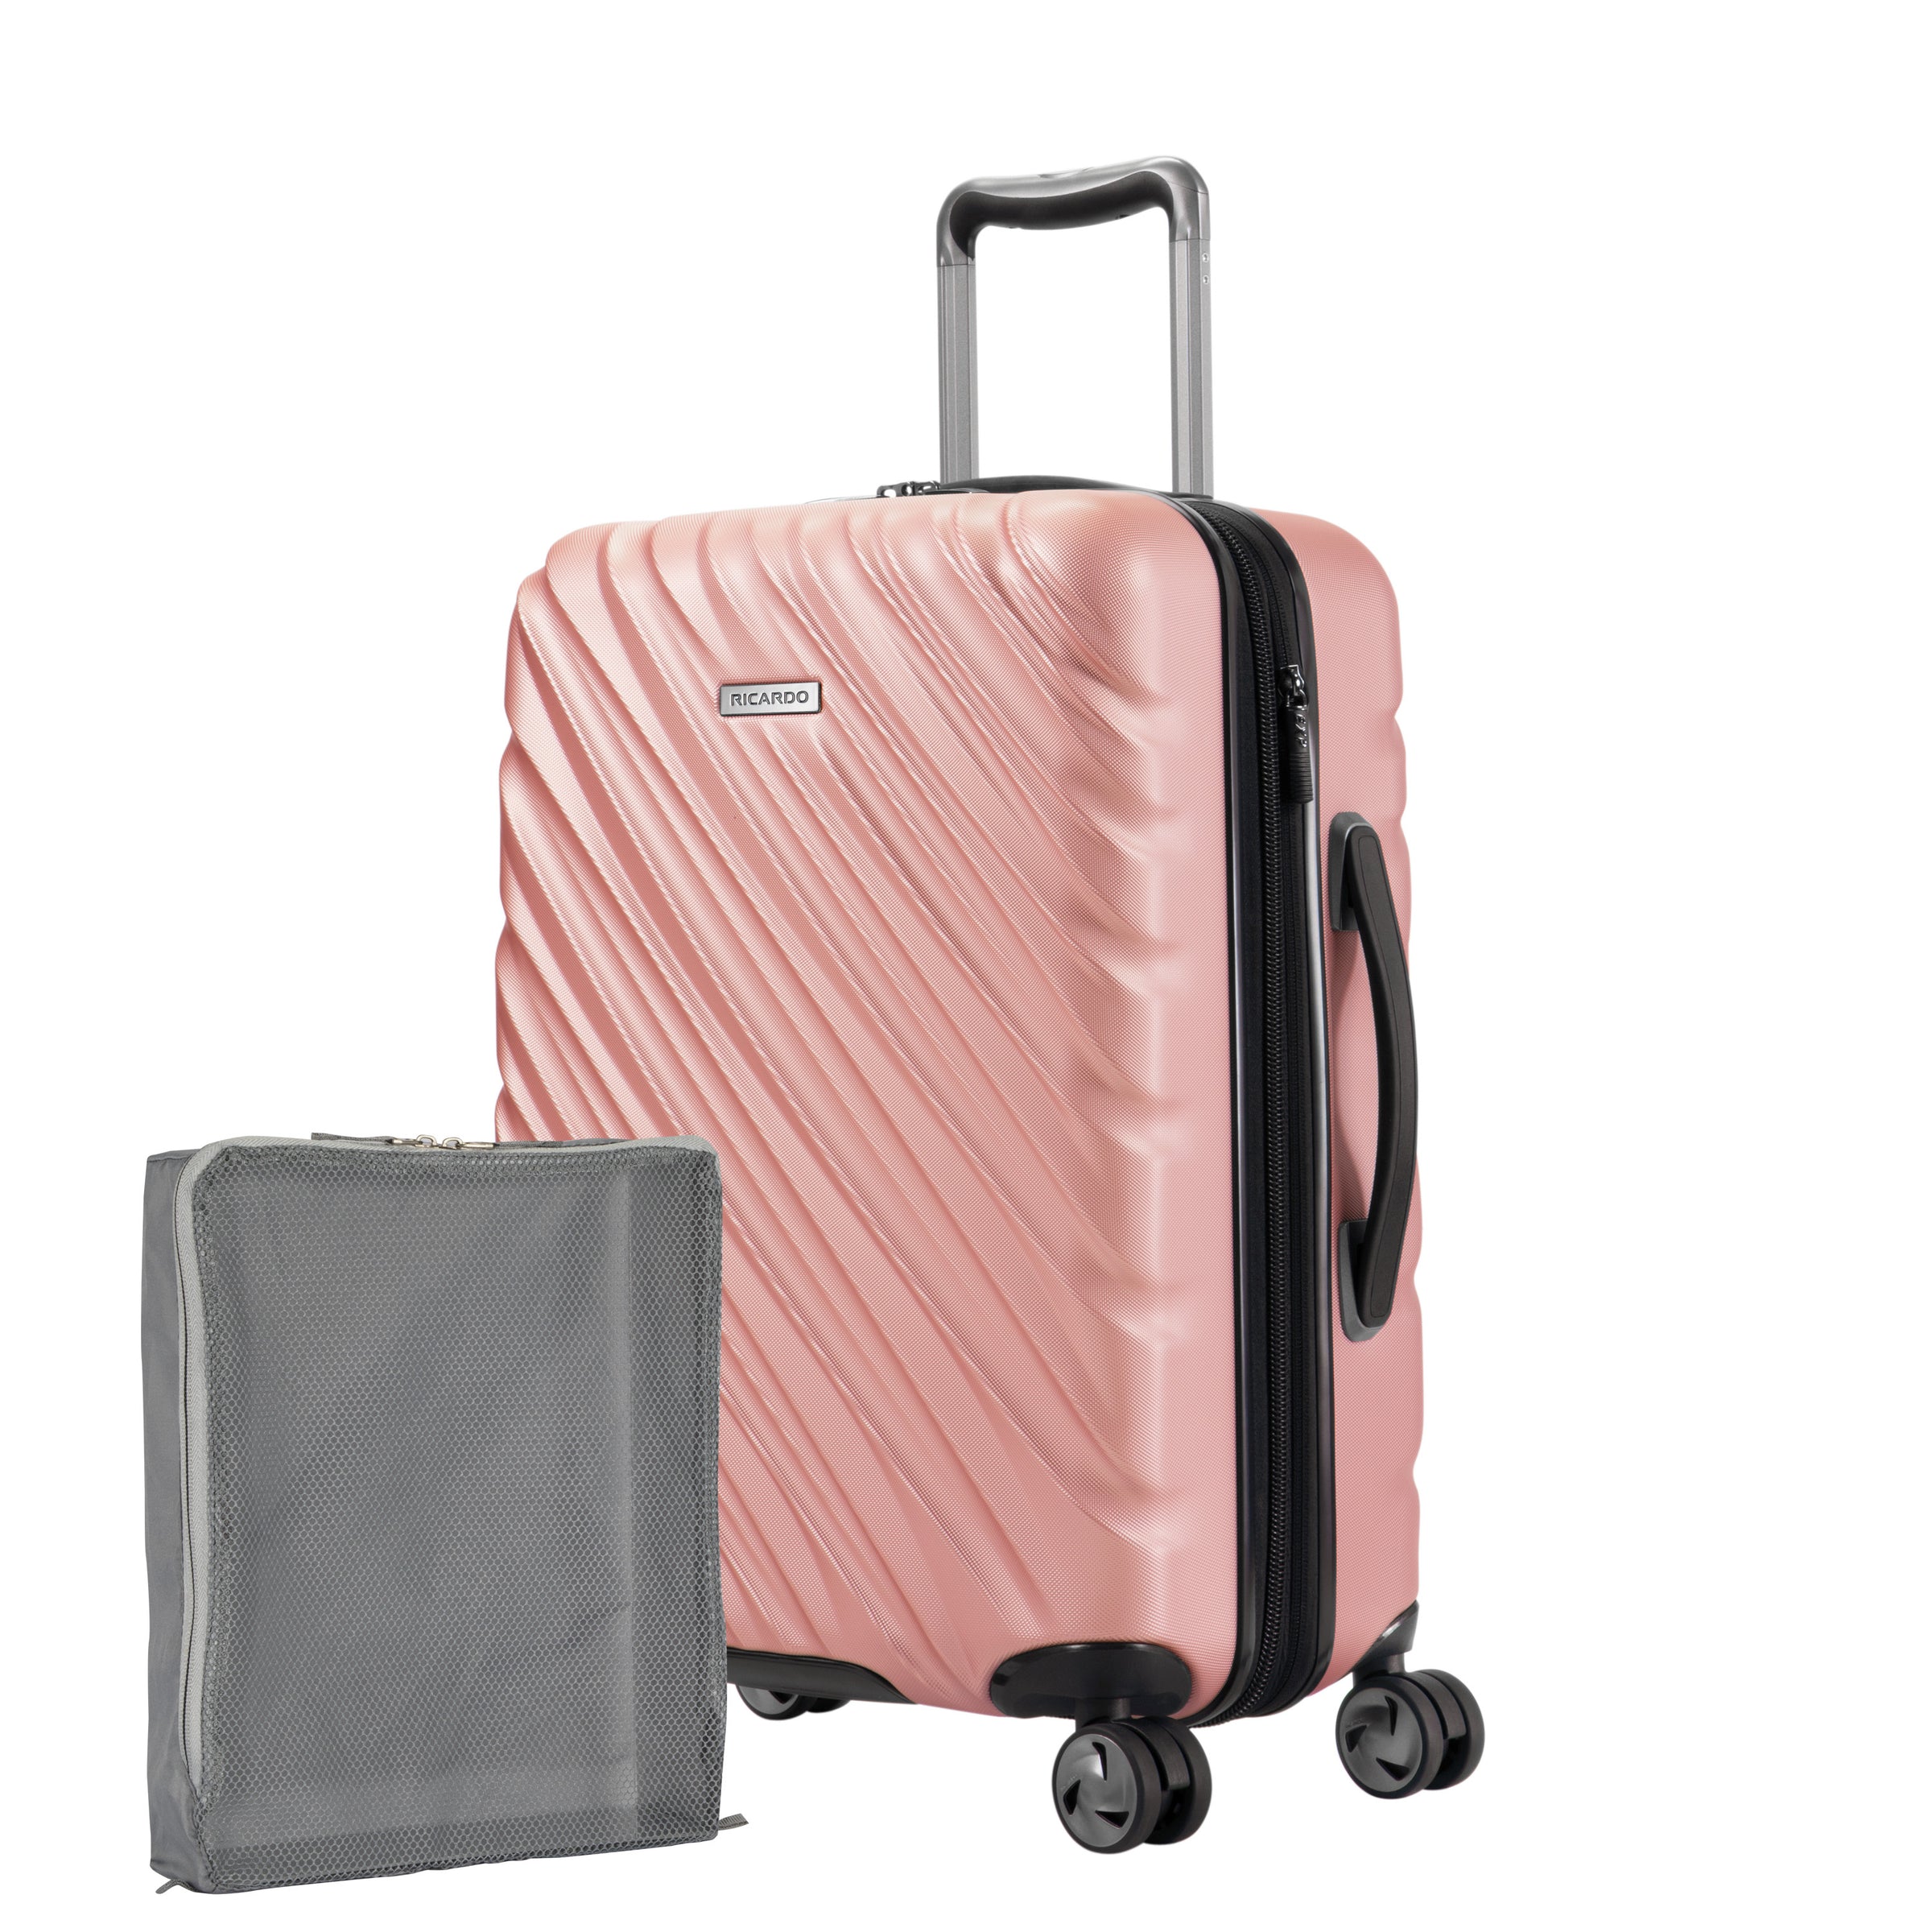 Rose gold Ricardo Mojave carry-on hardside suitcase with textured diagonal grooves shown with a large grey packing cube